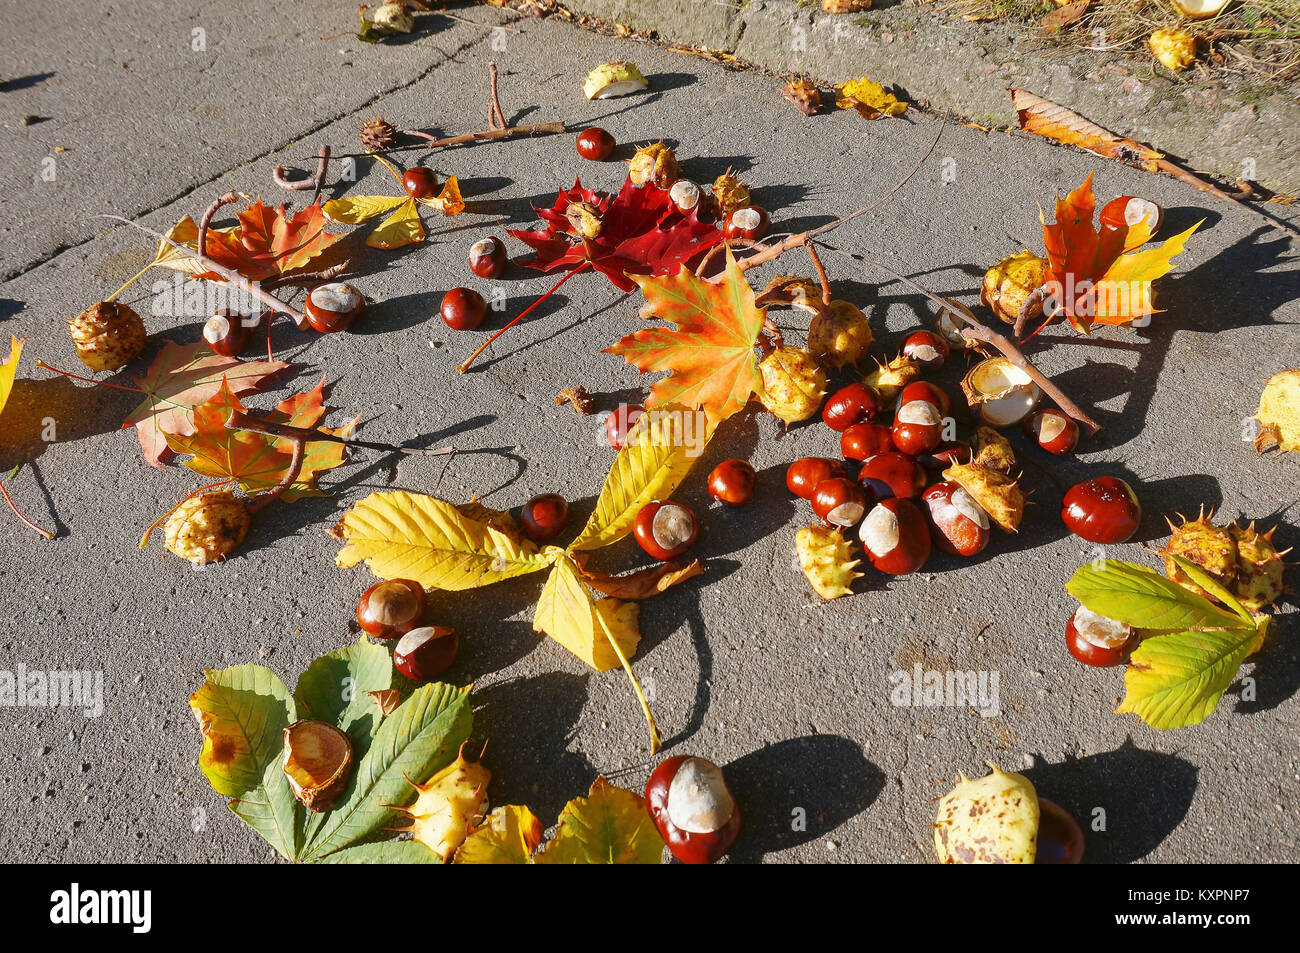 fallen autumn chestnut leaves and other, the fruits and leaves of chestnut on the pavement Stock Photo